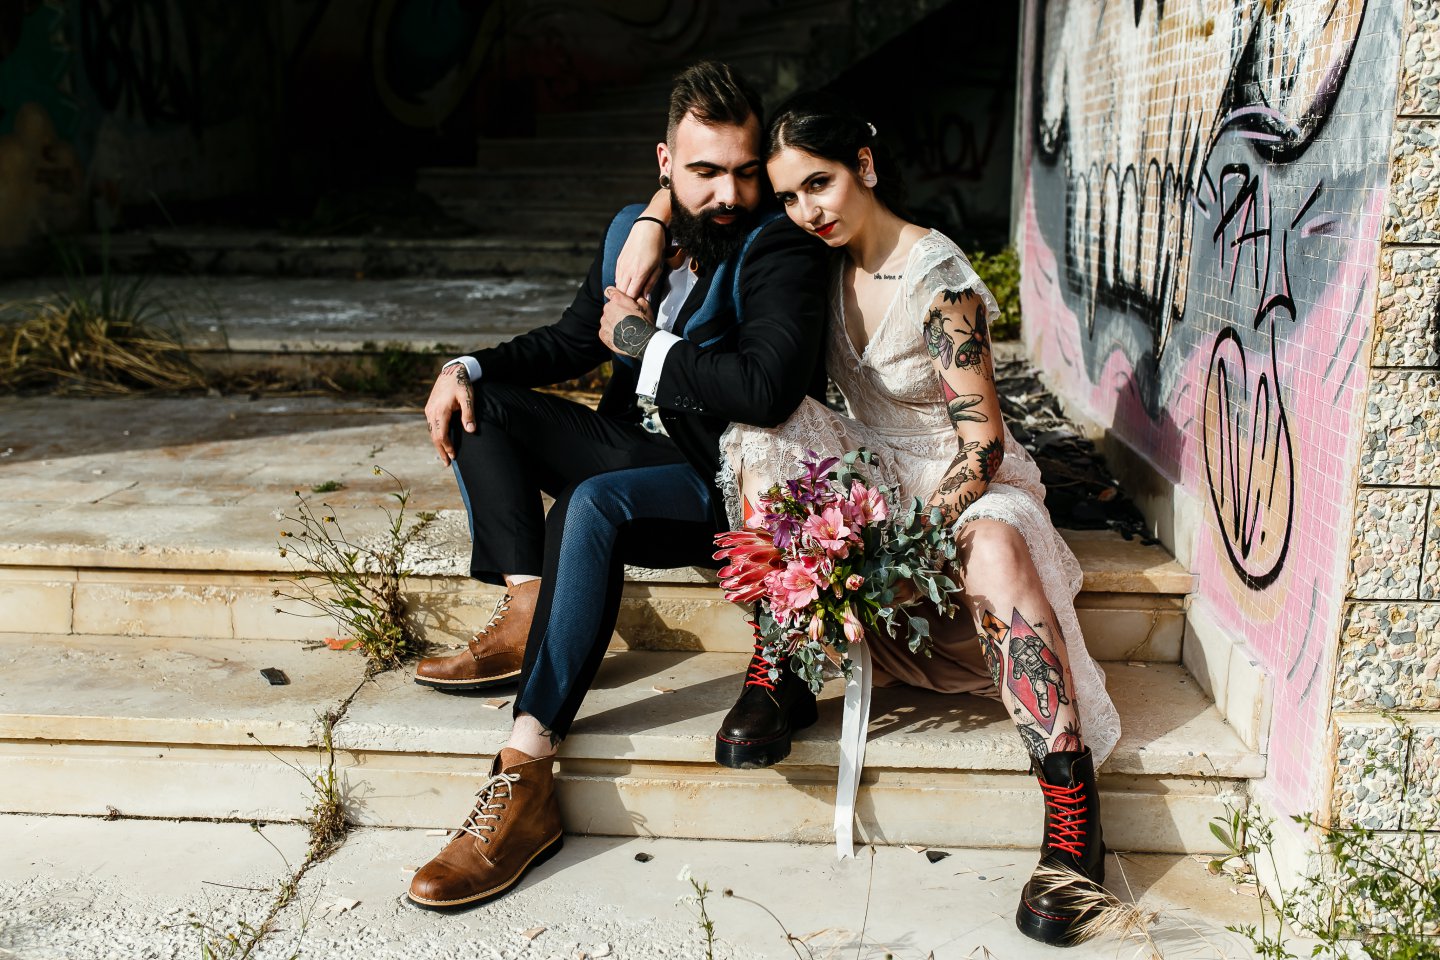 Photos of Tattooed Couples | Galleries | BlendUp